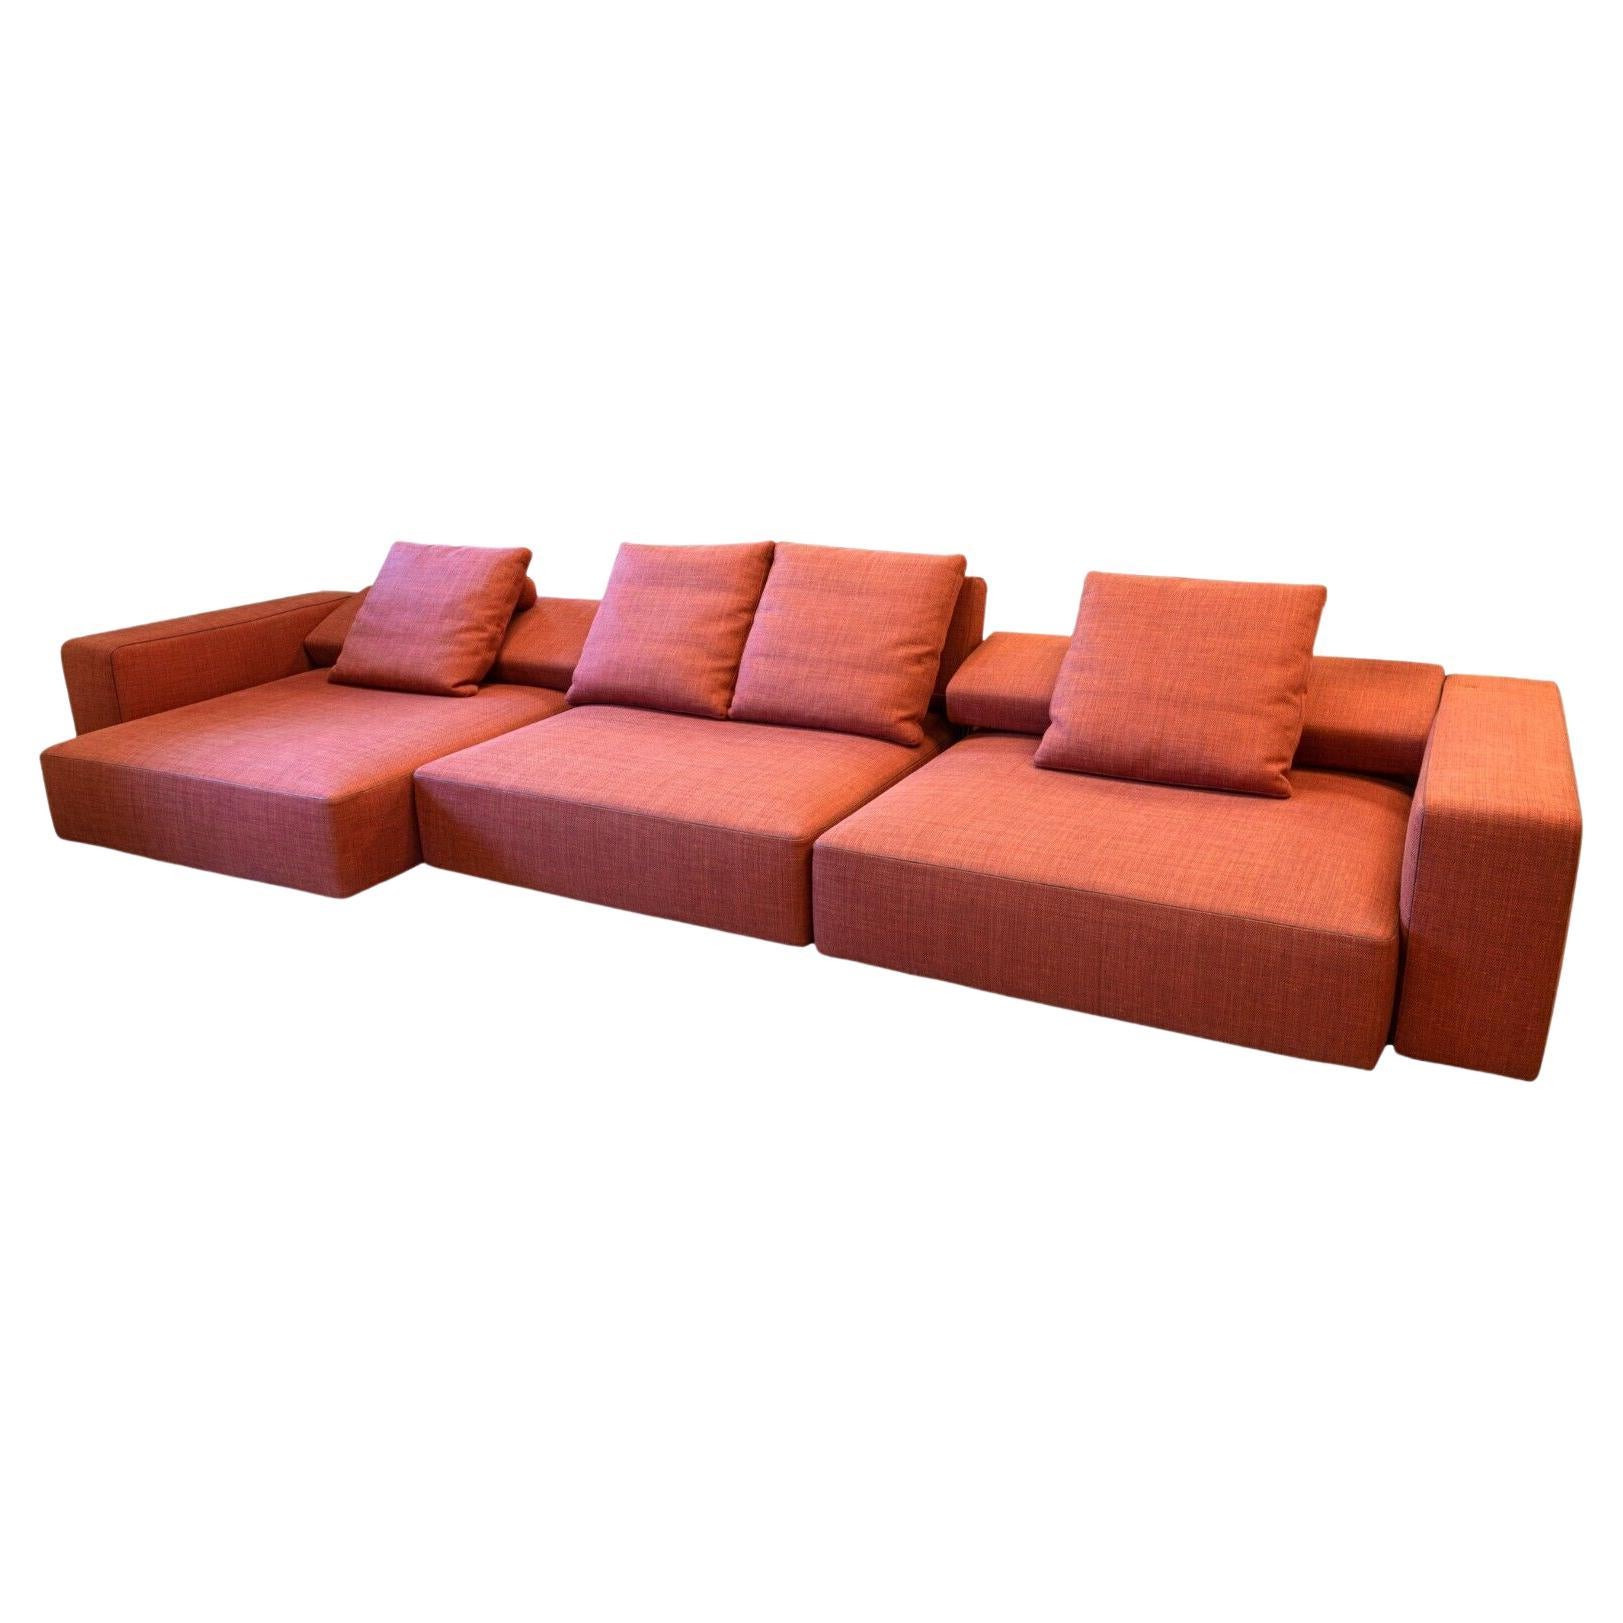 Contemporary Modern B&B Italia Andy Sofa Sectional Never Used